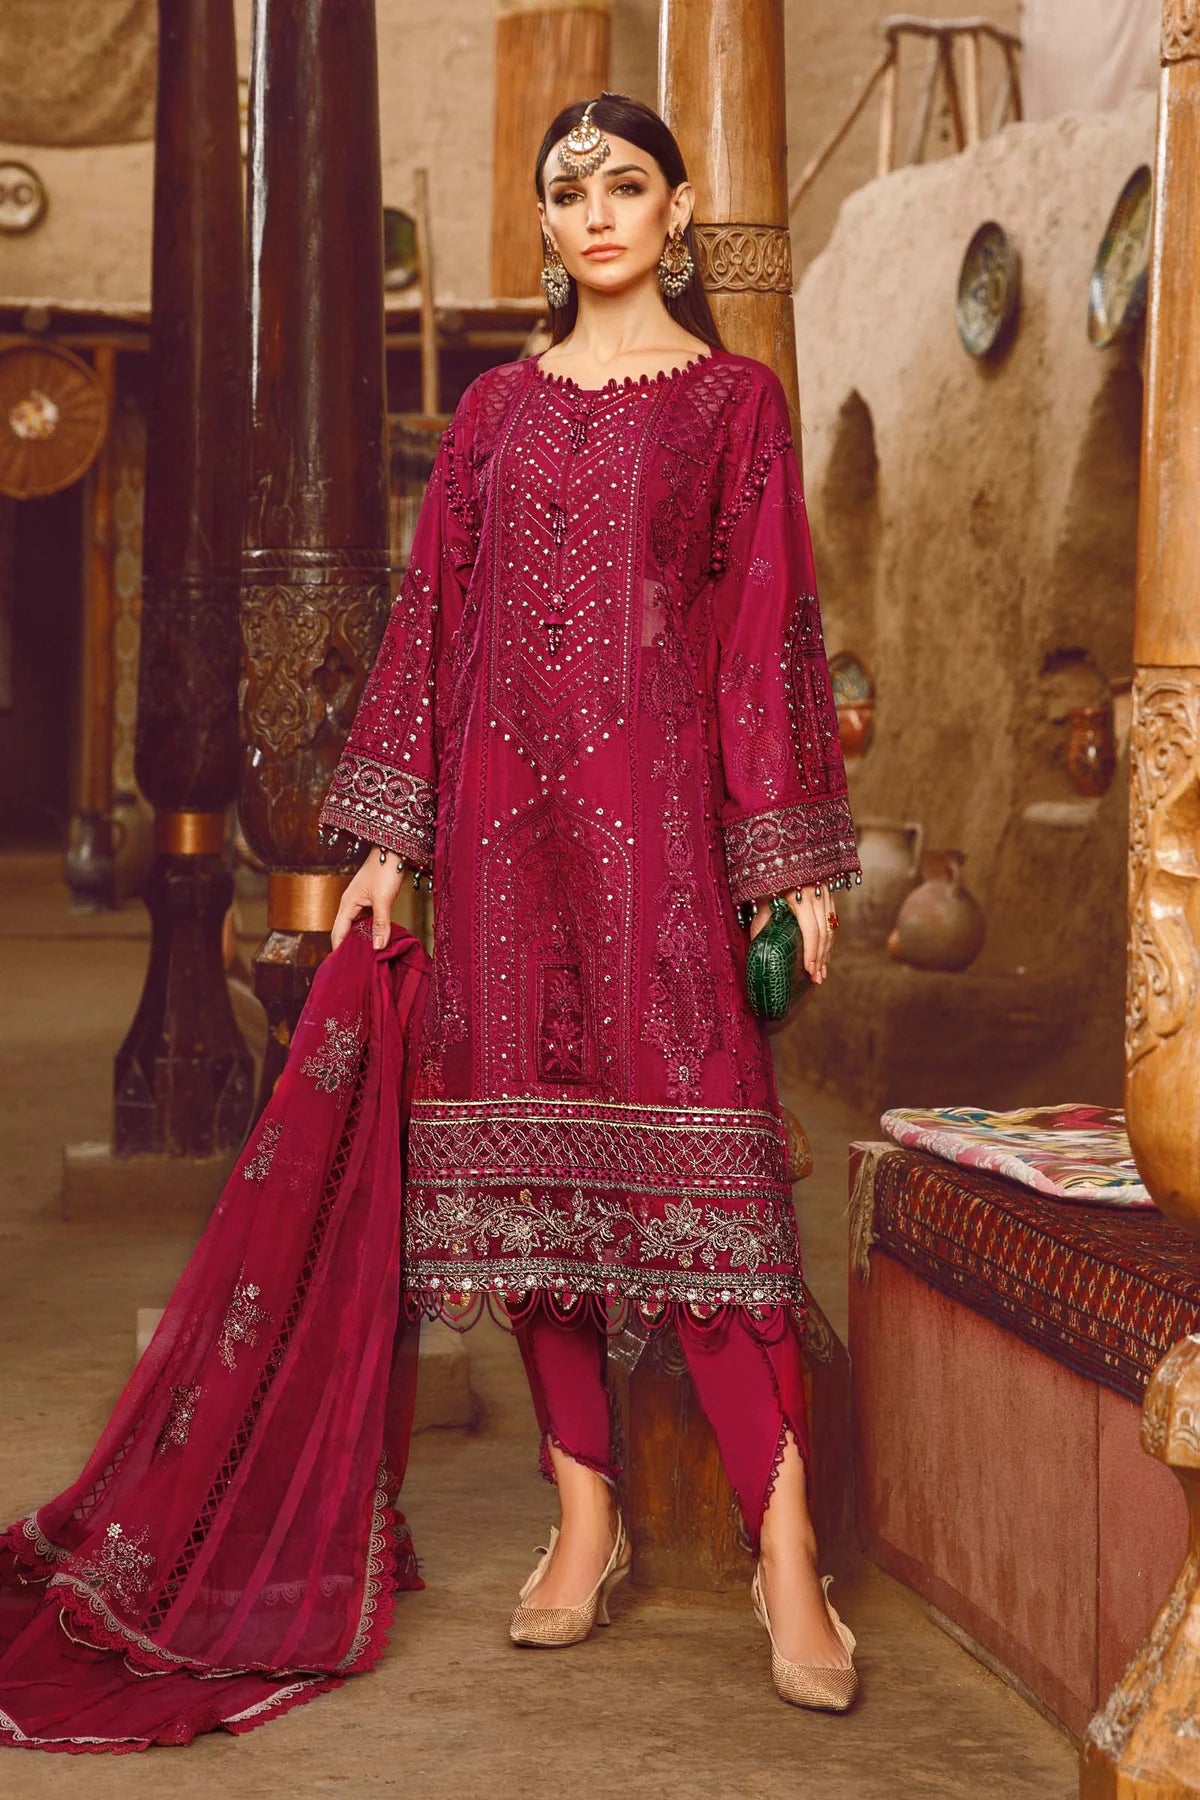 Maria B Inspired Embroidered Crimson 3 Piece Outfit With Net Dupatta - Desi Posh